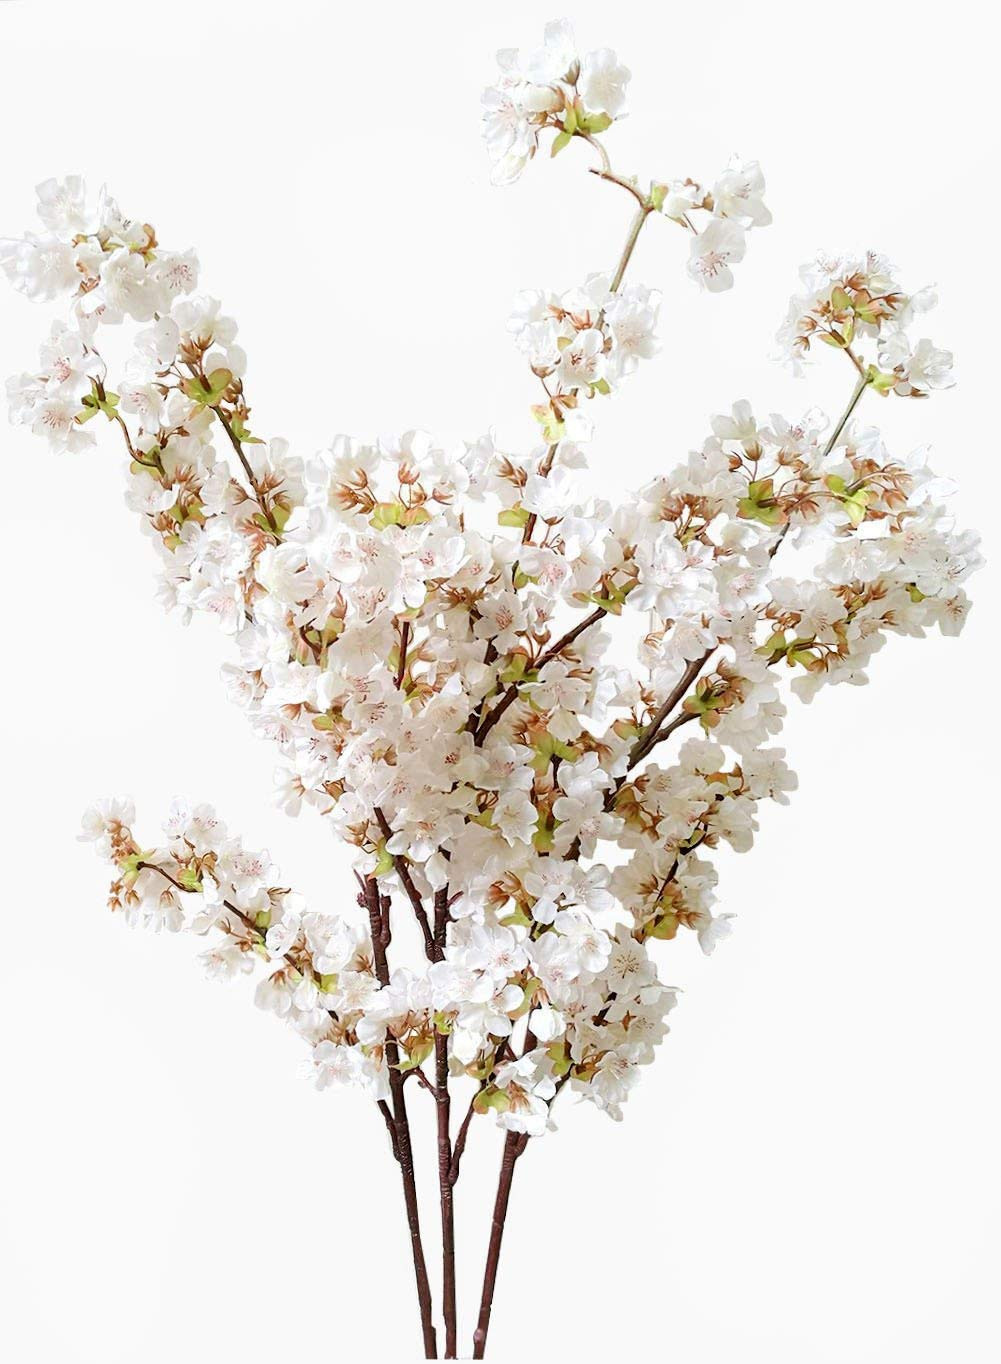 26 Awesome Glass Pillar Vase by ashland 2023 free download glass pillar vase by ashland of amazon com ahvoler artificial cherry blossom branches flowers stems within amazon com ahvoler artificial cherry blossom branches flowers stems silk tall fake 